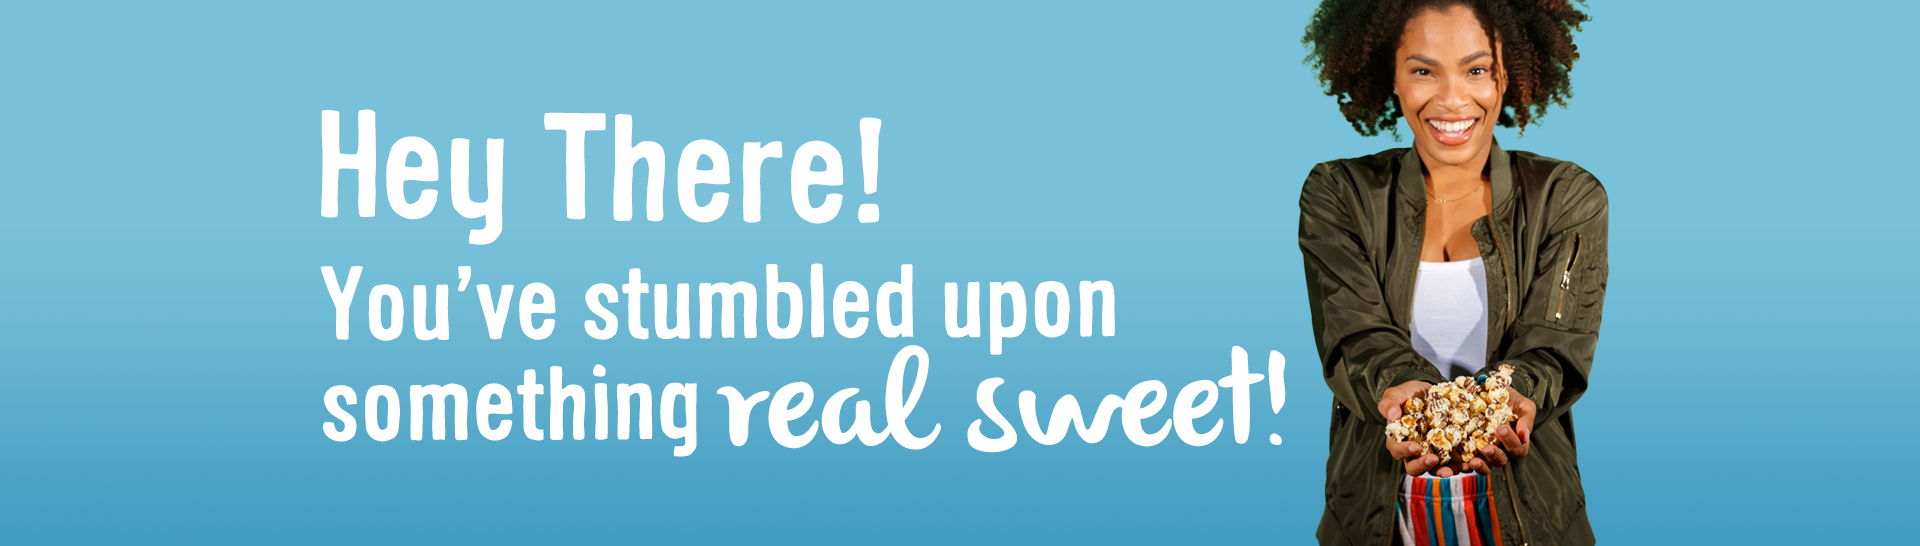 Hey There! You've stumbled upon something REAL SWEET!